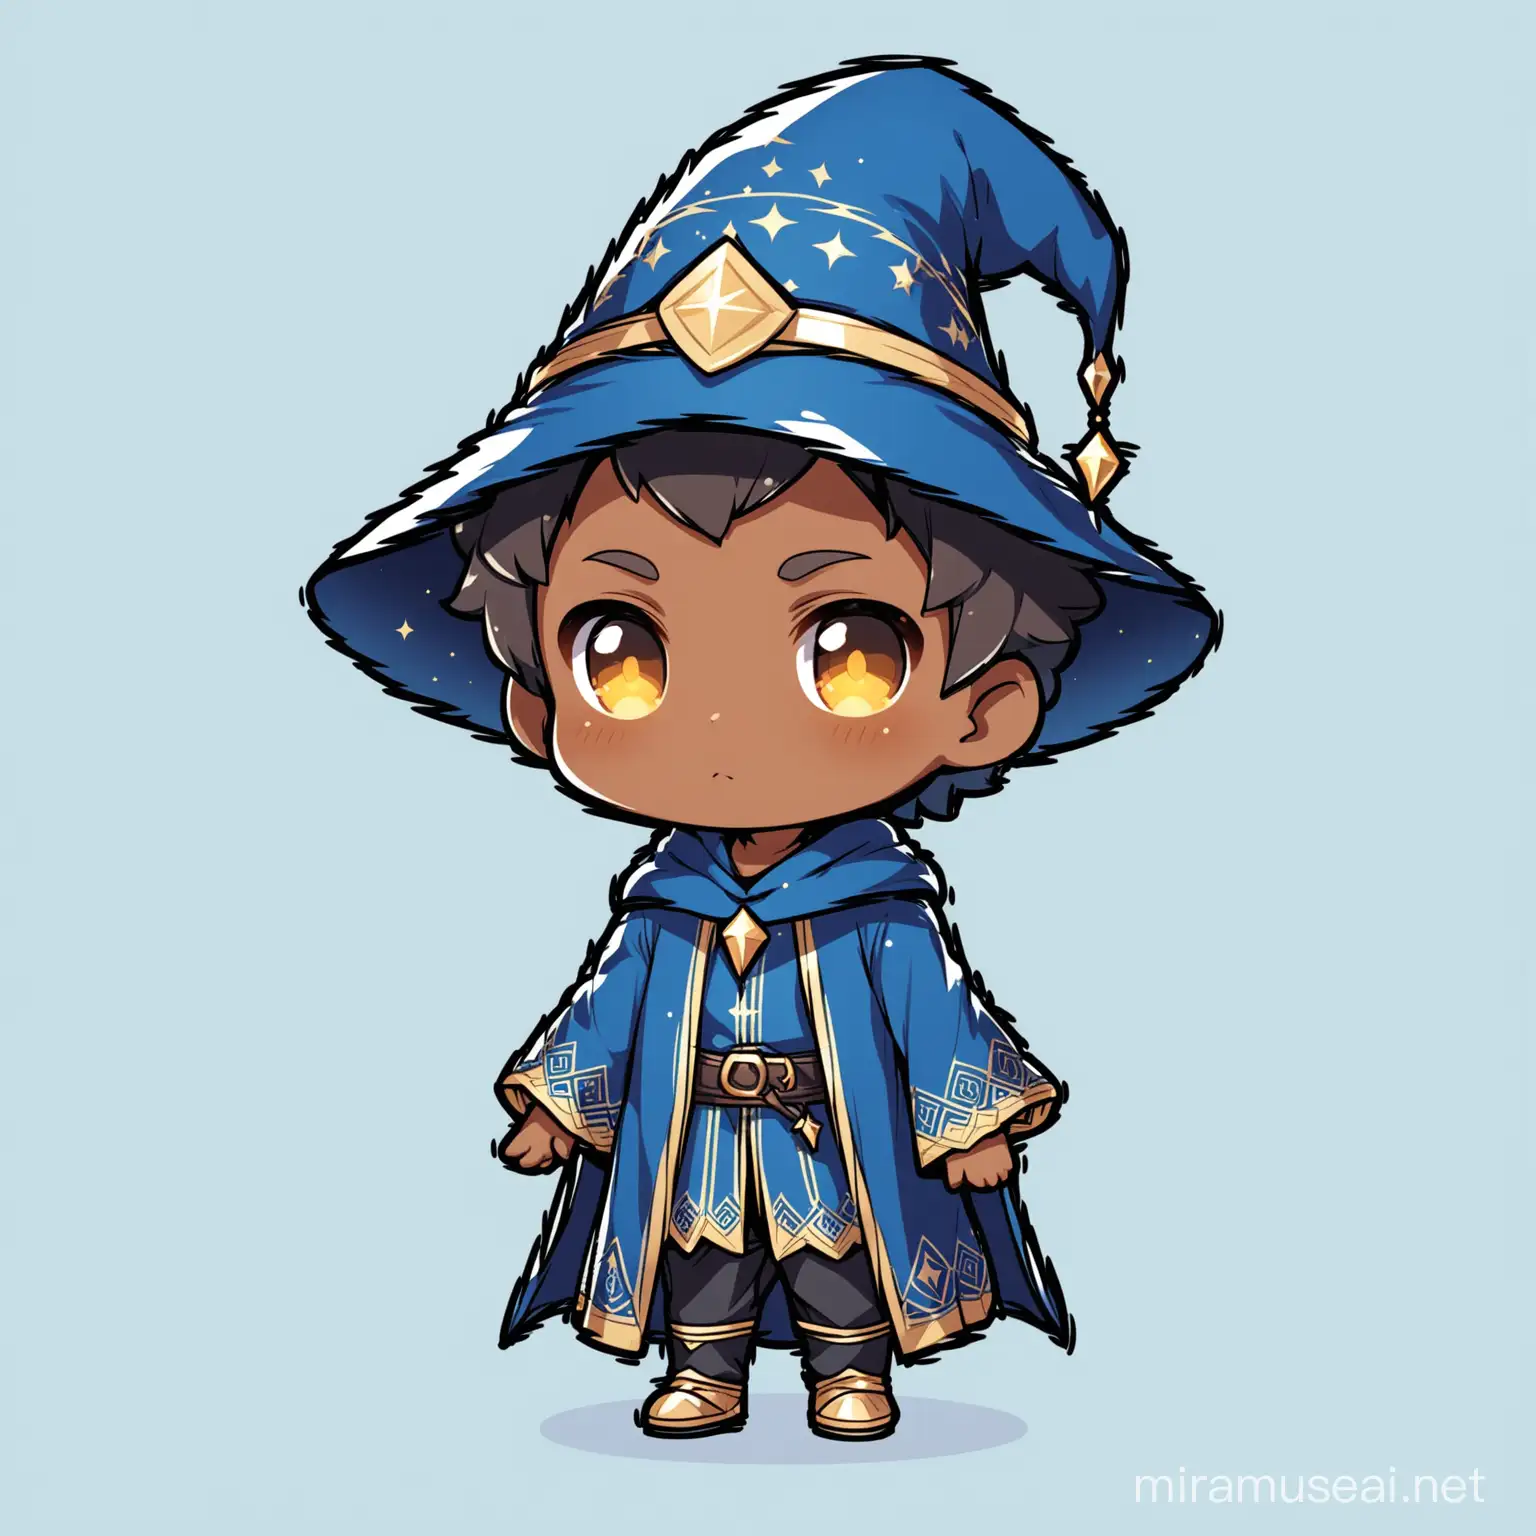 male child wizard with dark skin wearing blue on a white background full body chibi style